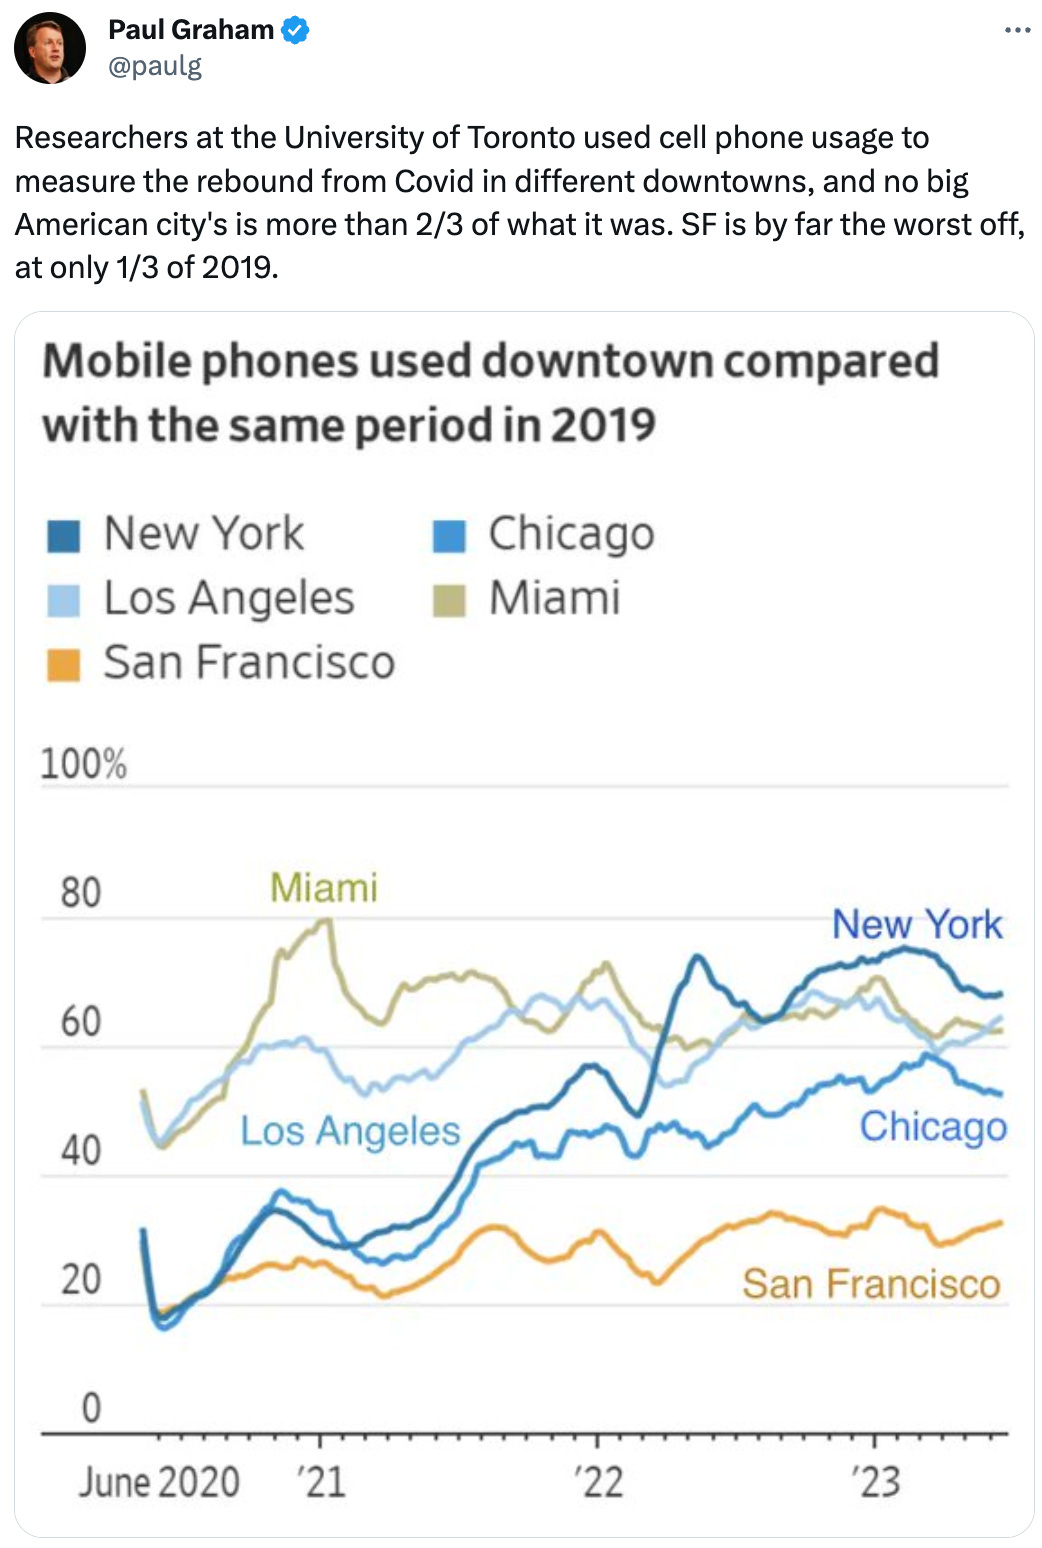  See new Tweets Conversation Paul Graham @paulg Researchers at the University of Toronto used cell phone usage to measure the rebound from Covid in different downtowns, and no big American city's is more than 2/3 of what it was. SF is by far the worst off, at only 1/3 of 2019.